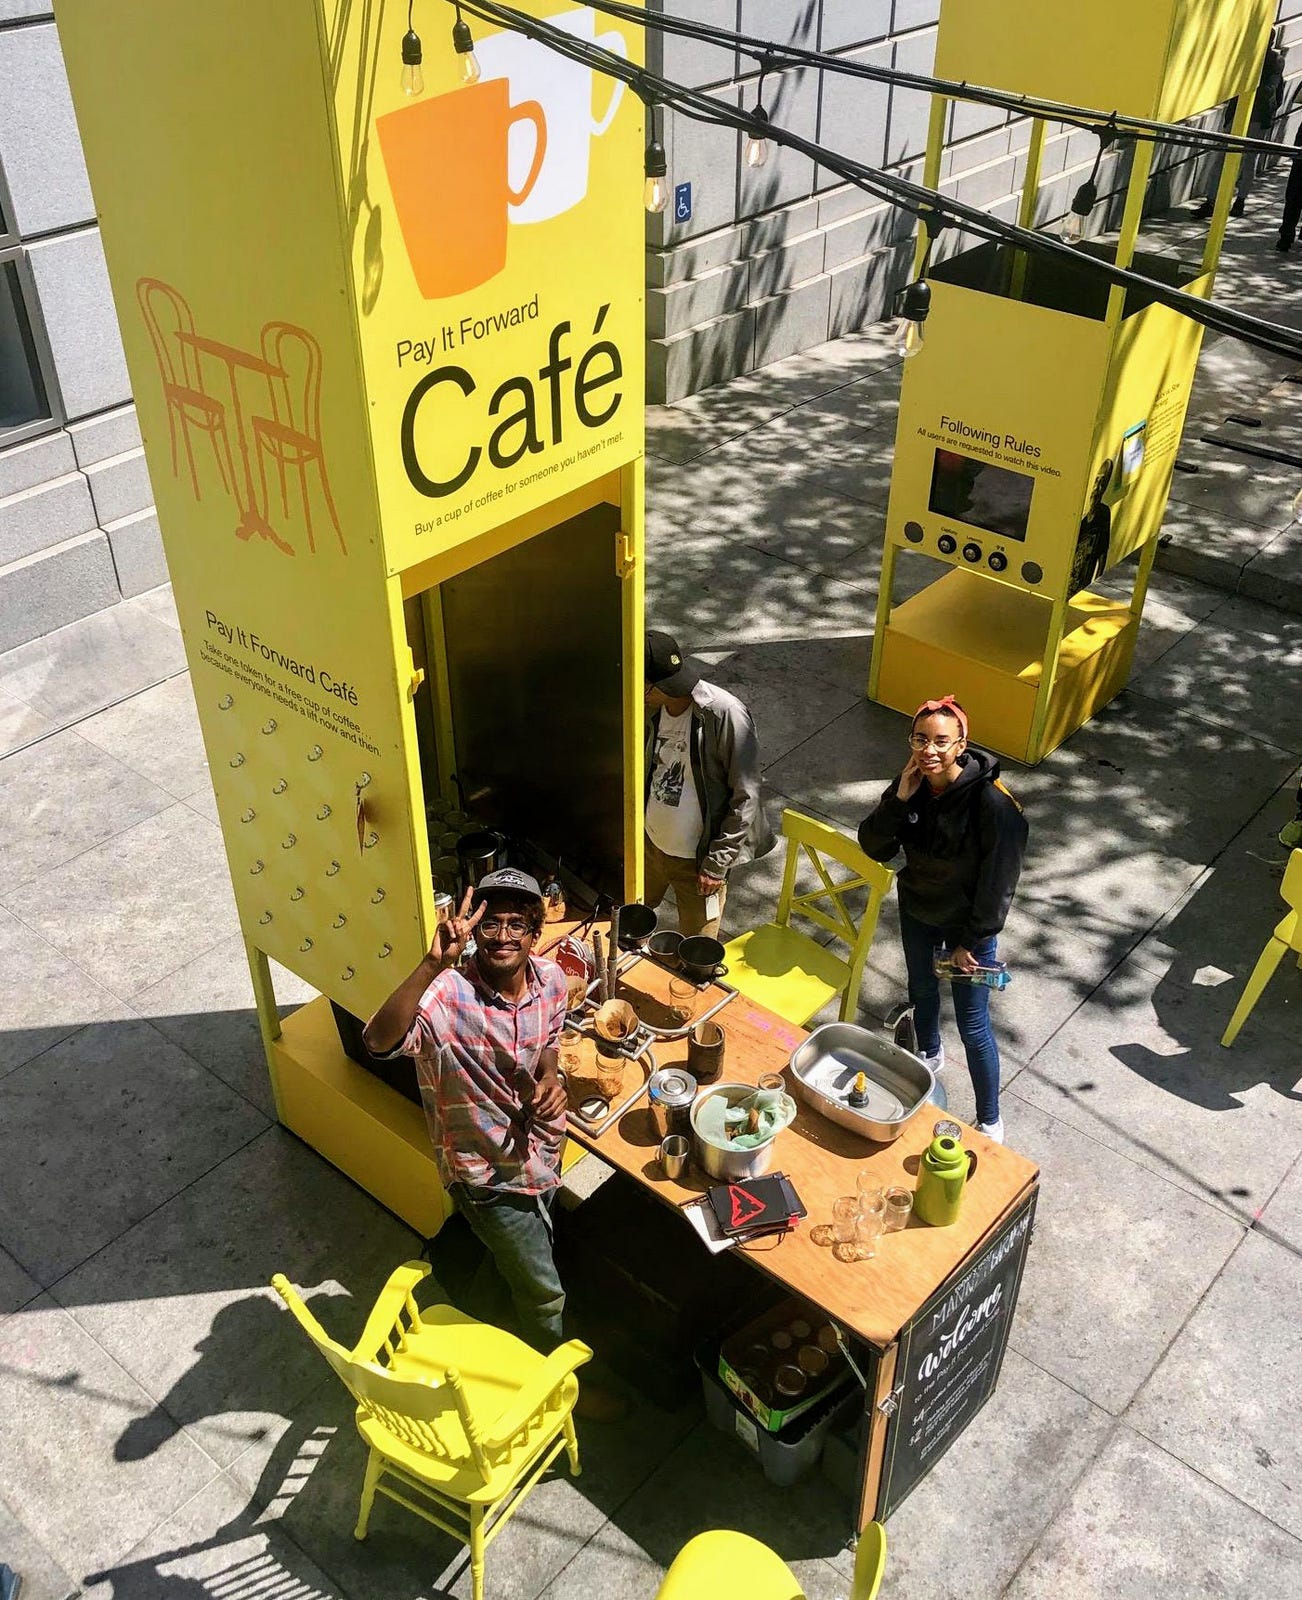 In a shot taken from above, two people stand in a public plaza at a table covered in coffee-making supplies. A tall yellow cabinet Identifies the table as the “Pay it forward café”. Both people are looking up and smiling at the camera.